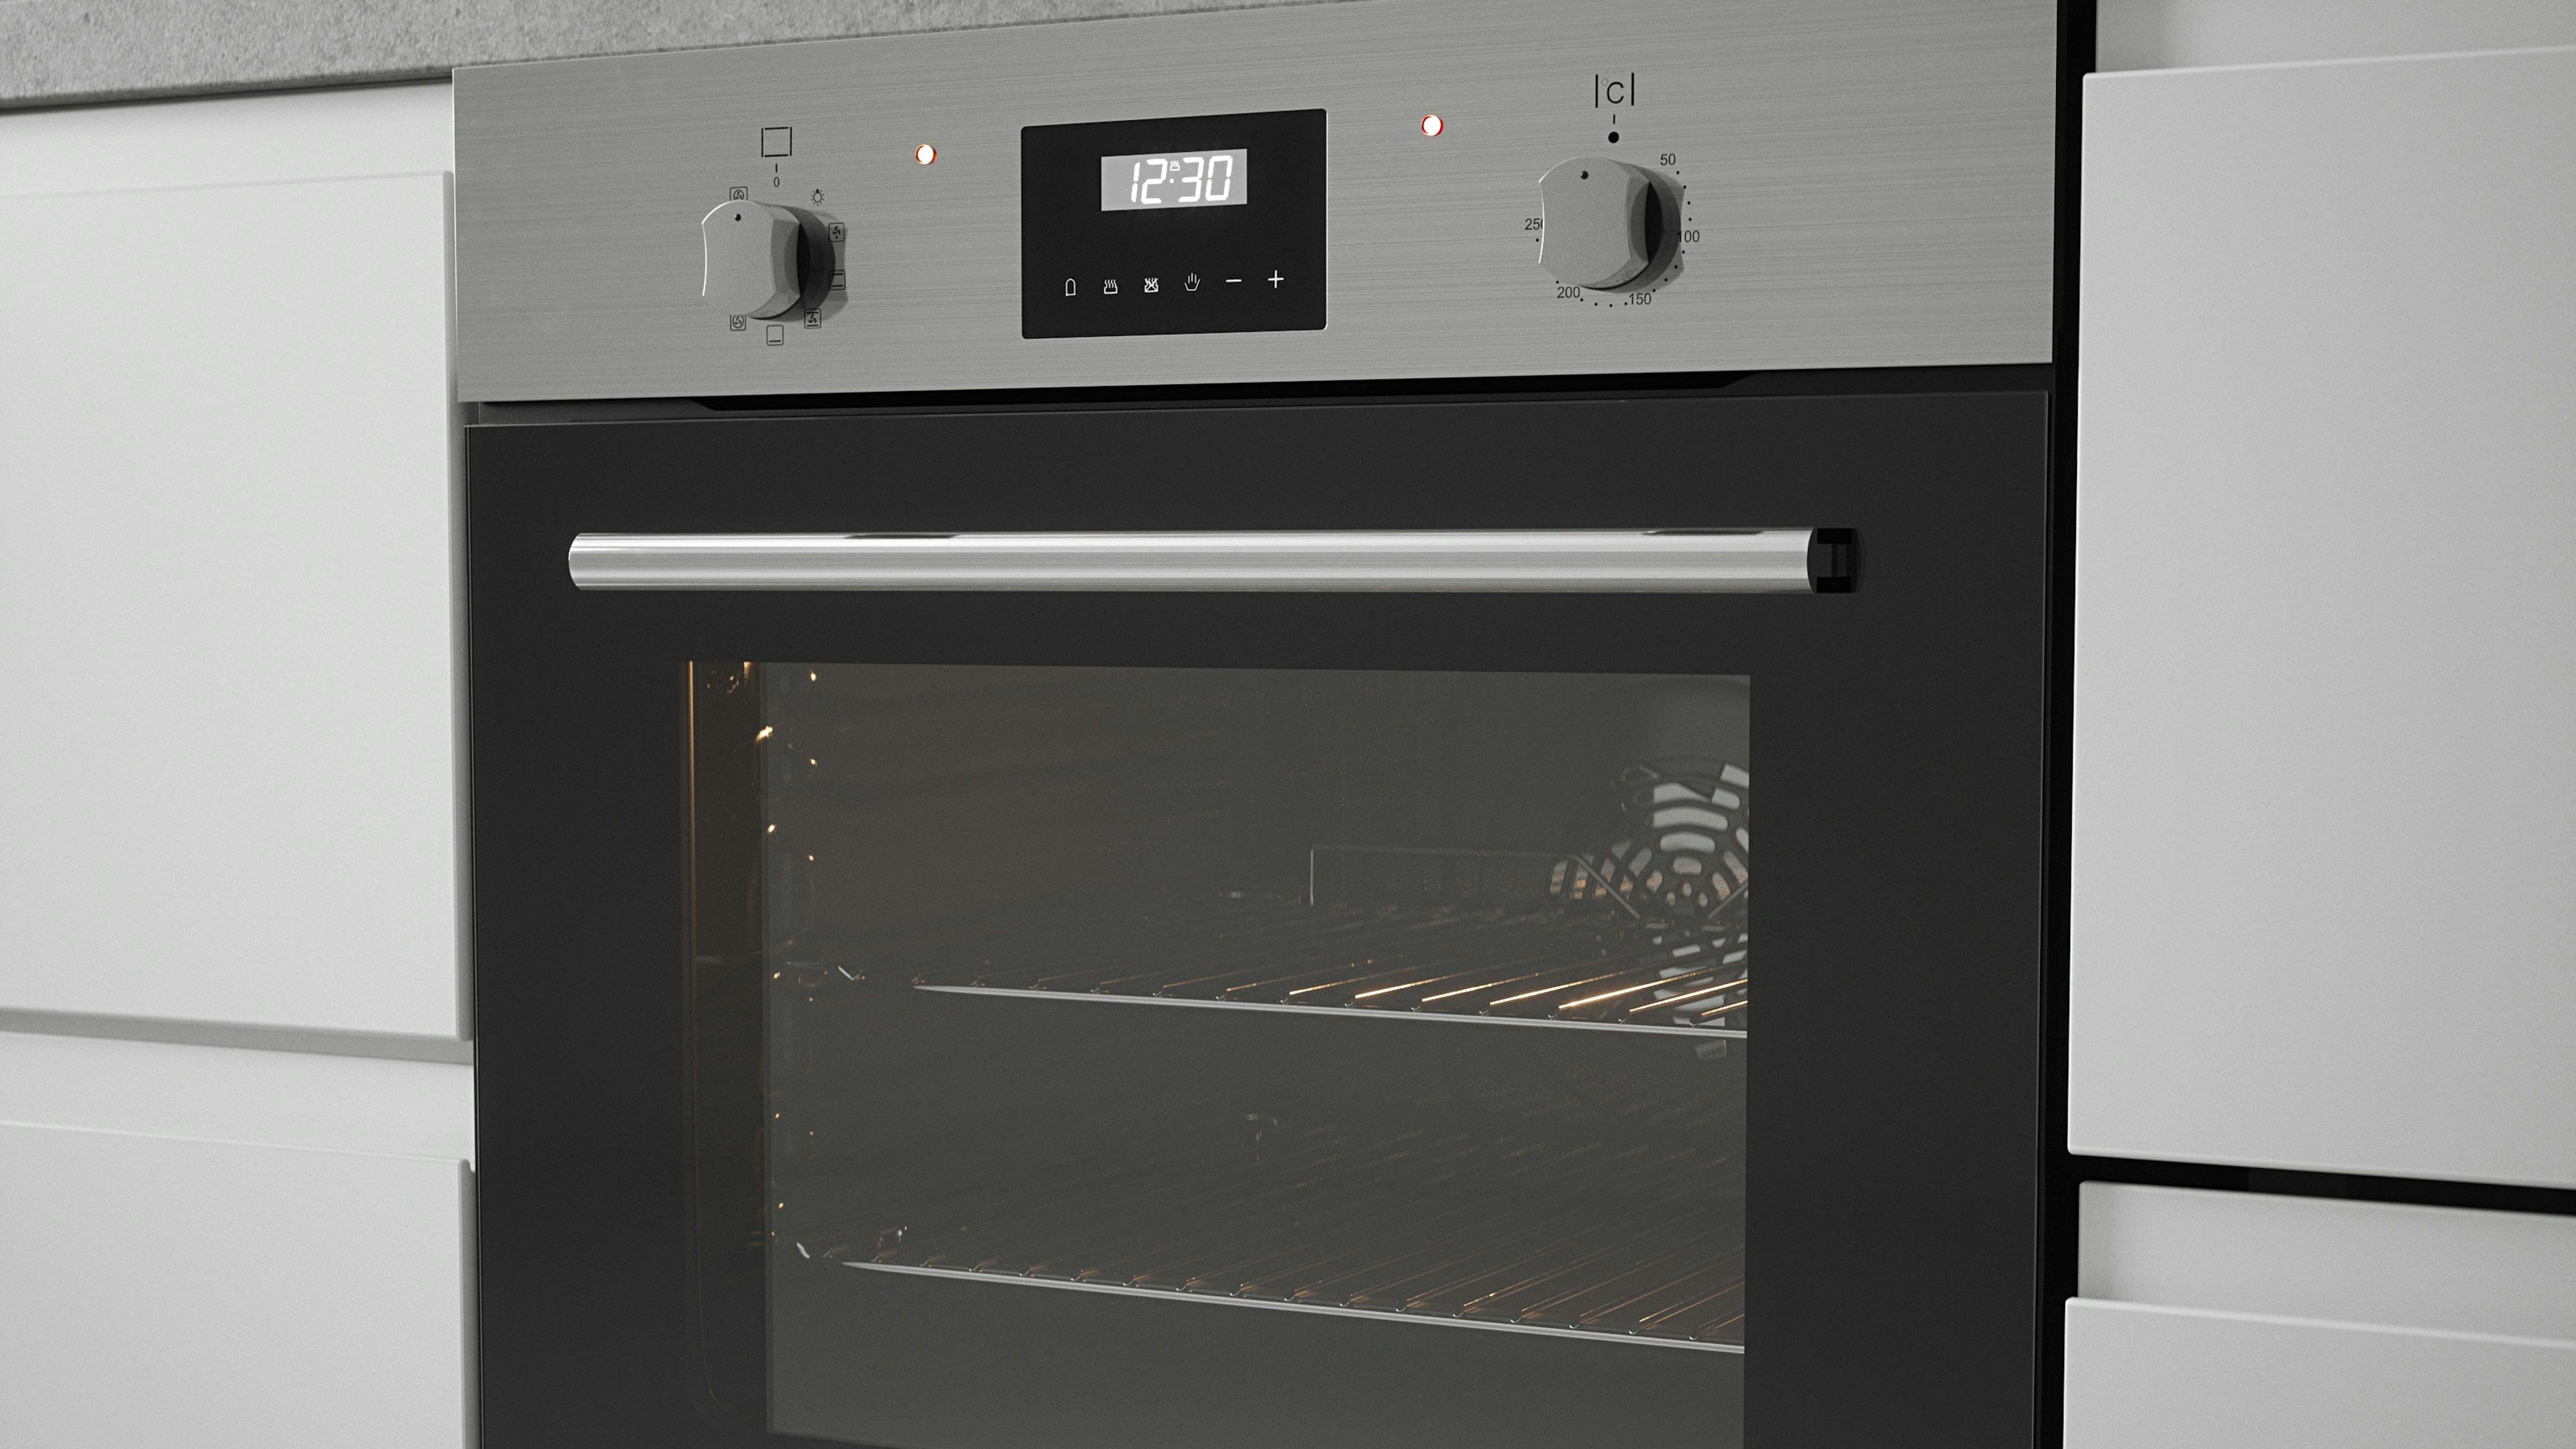 Wall Oven Buying Guide